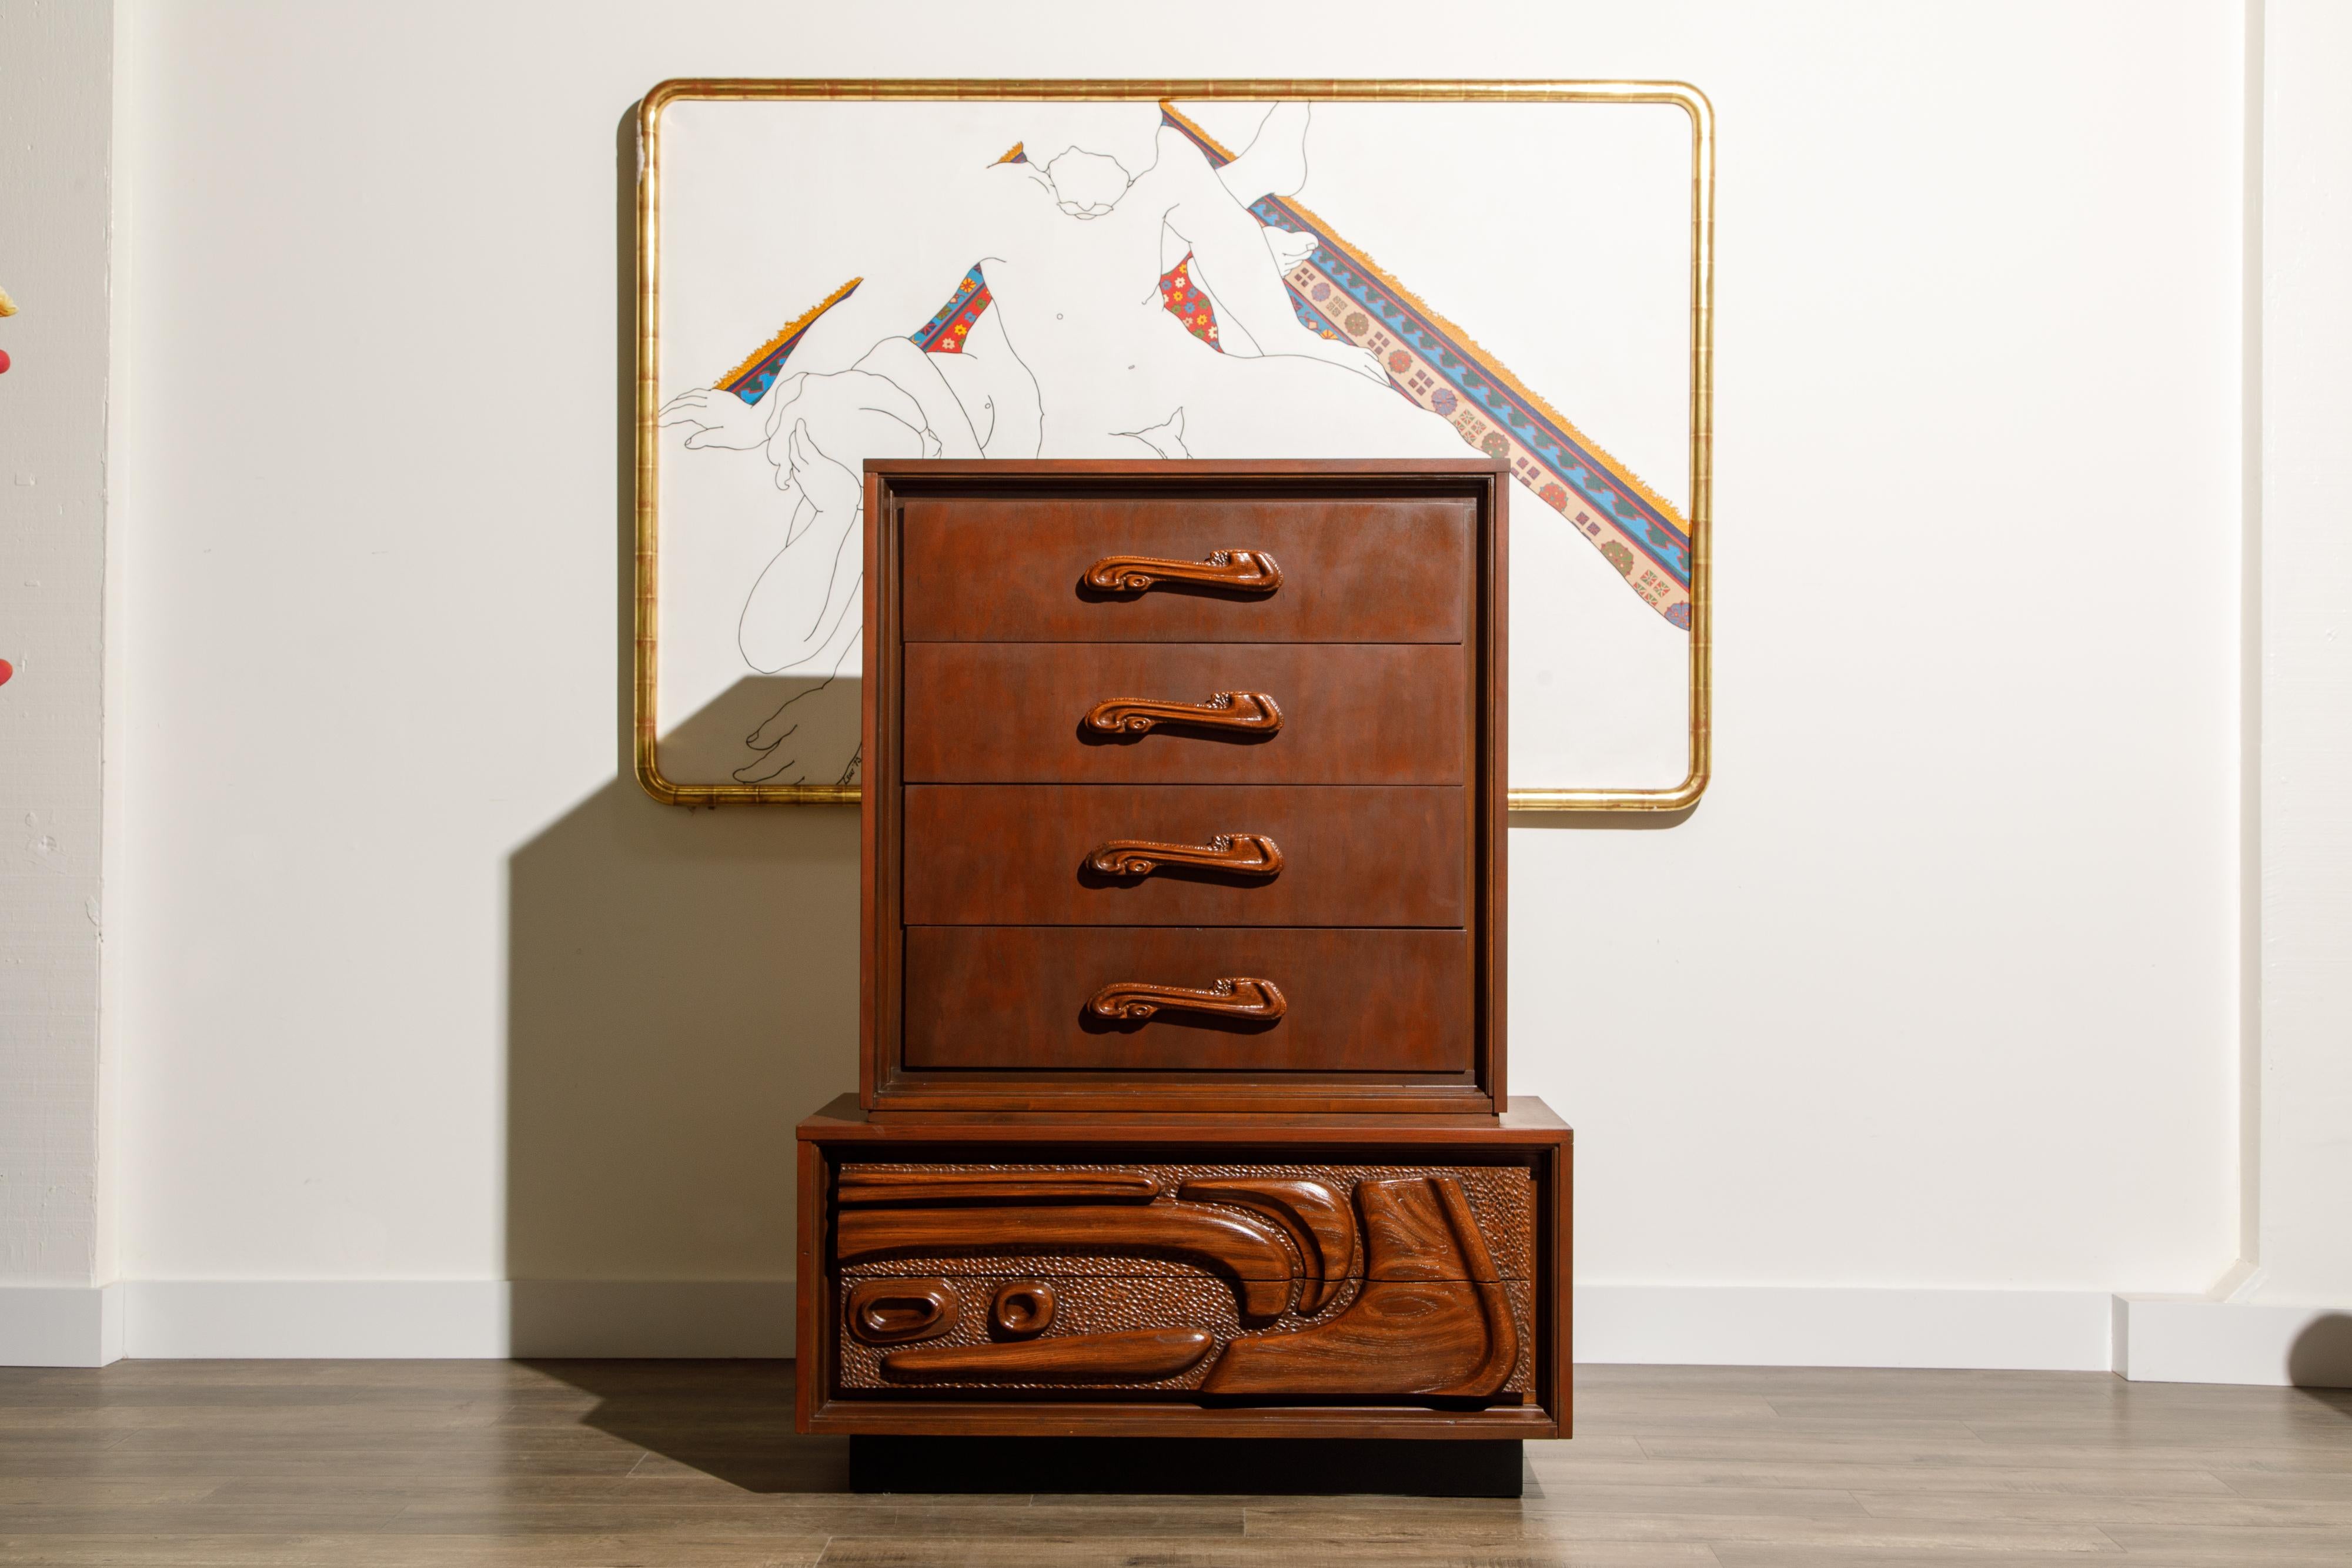 This fantastic lacquered sculpted walnut 'Oceanic' highboy dresser cabinet by Pulaski Furniture Corporation, circa 1969 which perfectly encapsulates the California surf mentality of the 1960s and 1970s, making this piece a highly sought after design